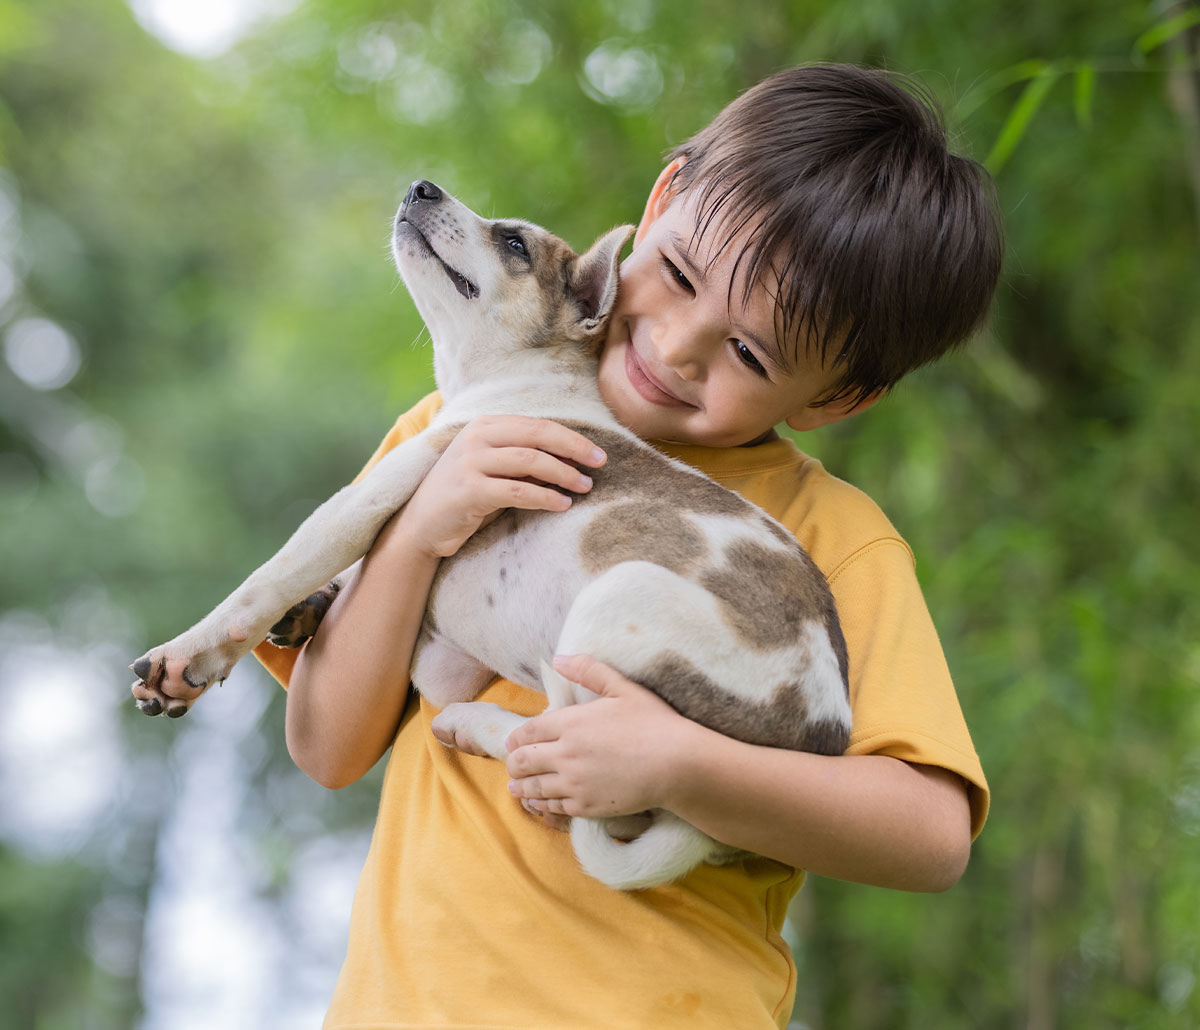 image of a child with a small dog